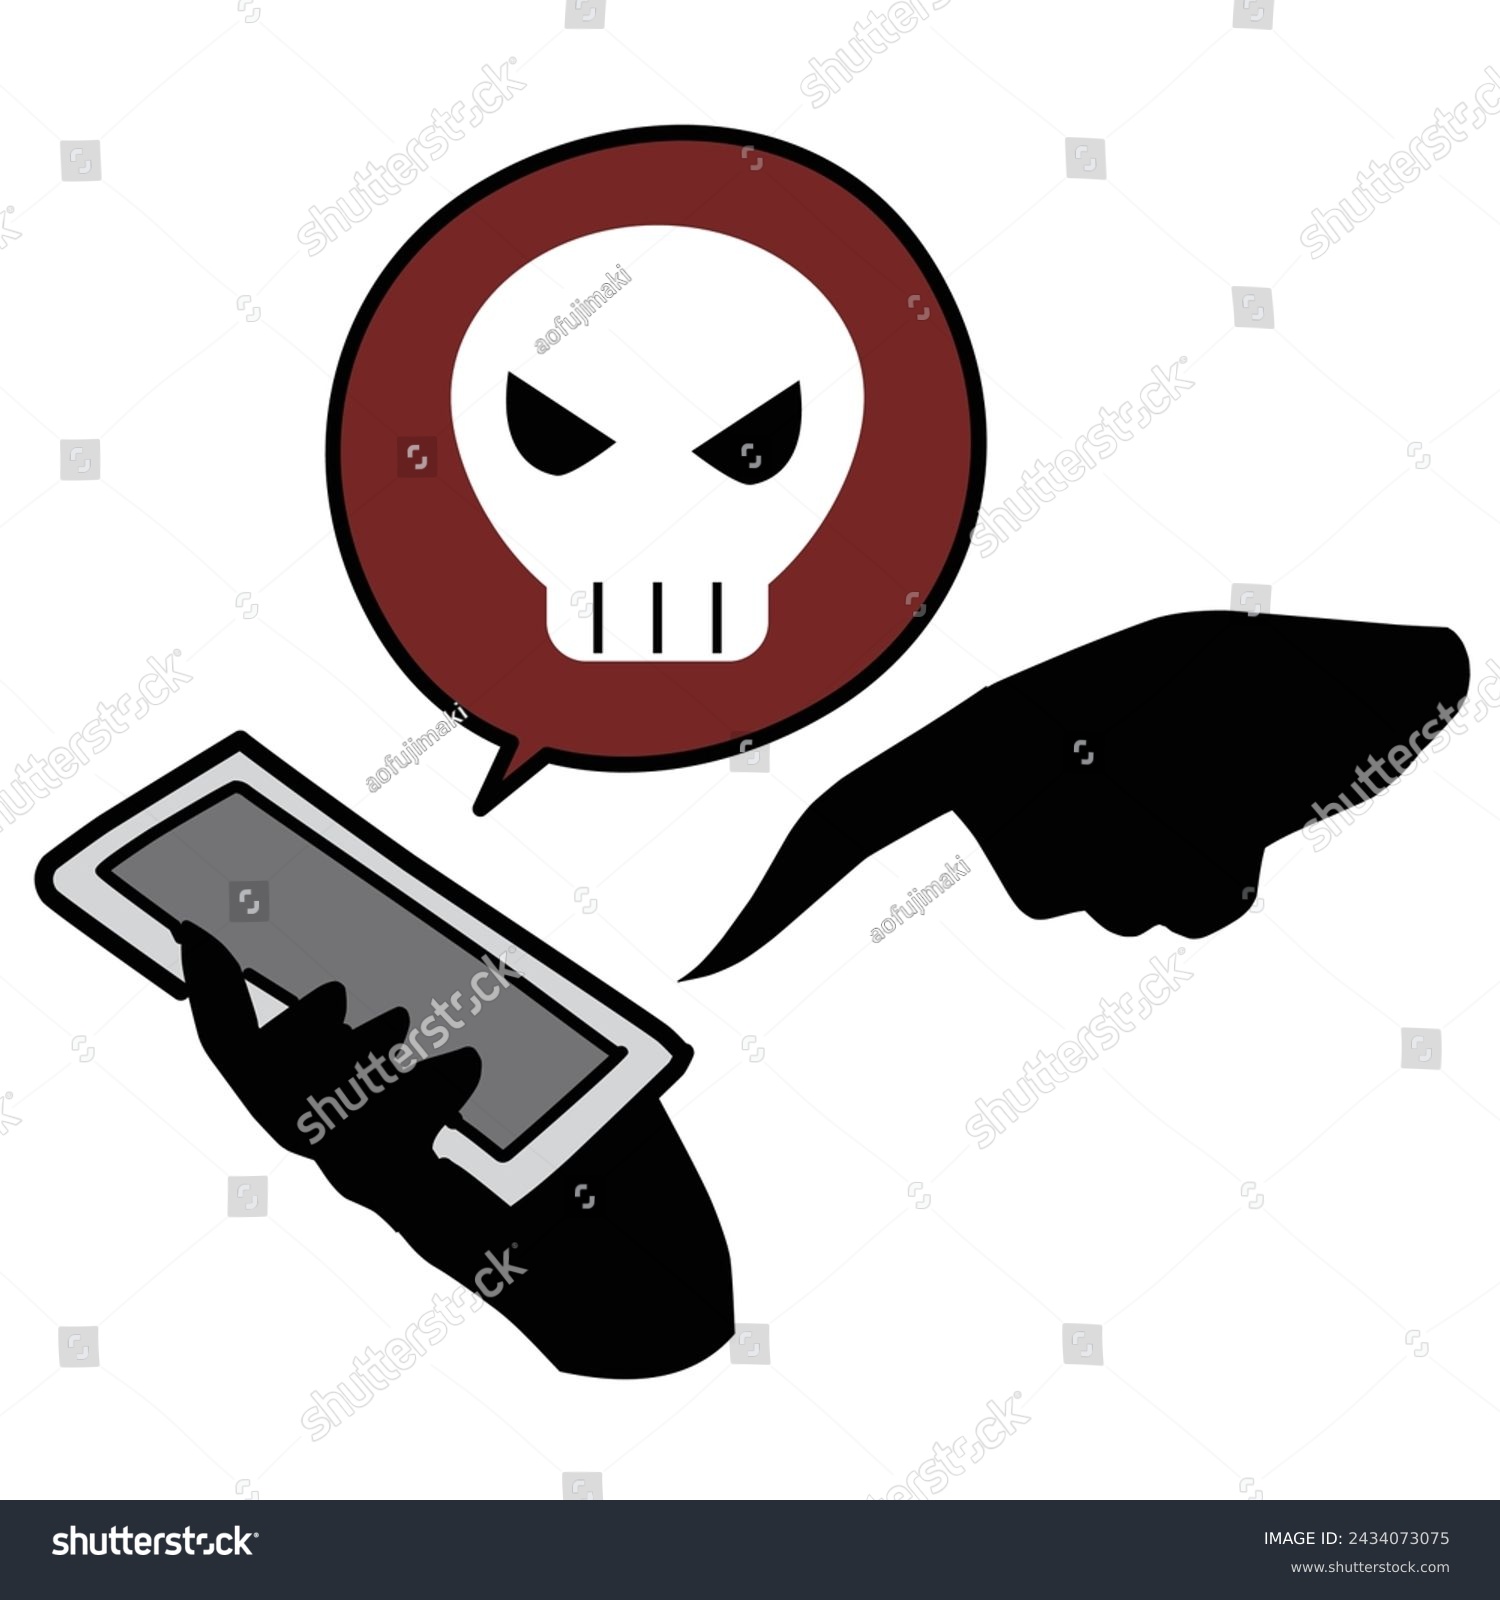 SVG of Materials of skull mark and smartphone operated by bad guys svg